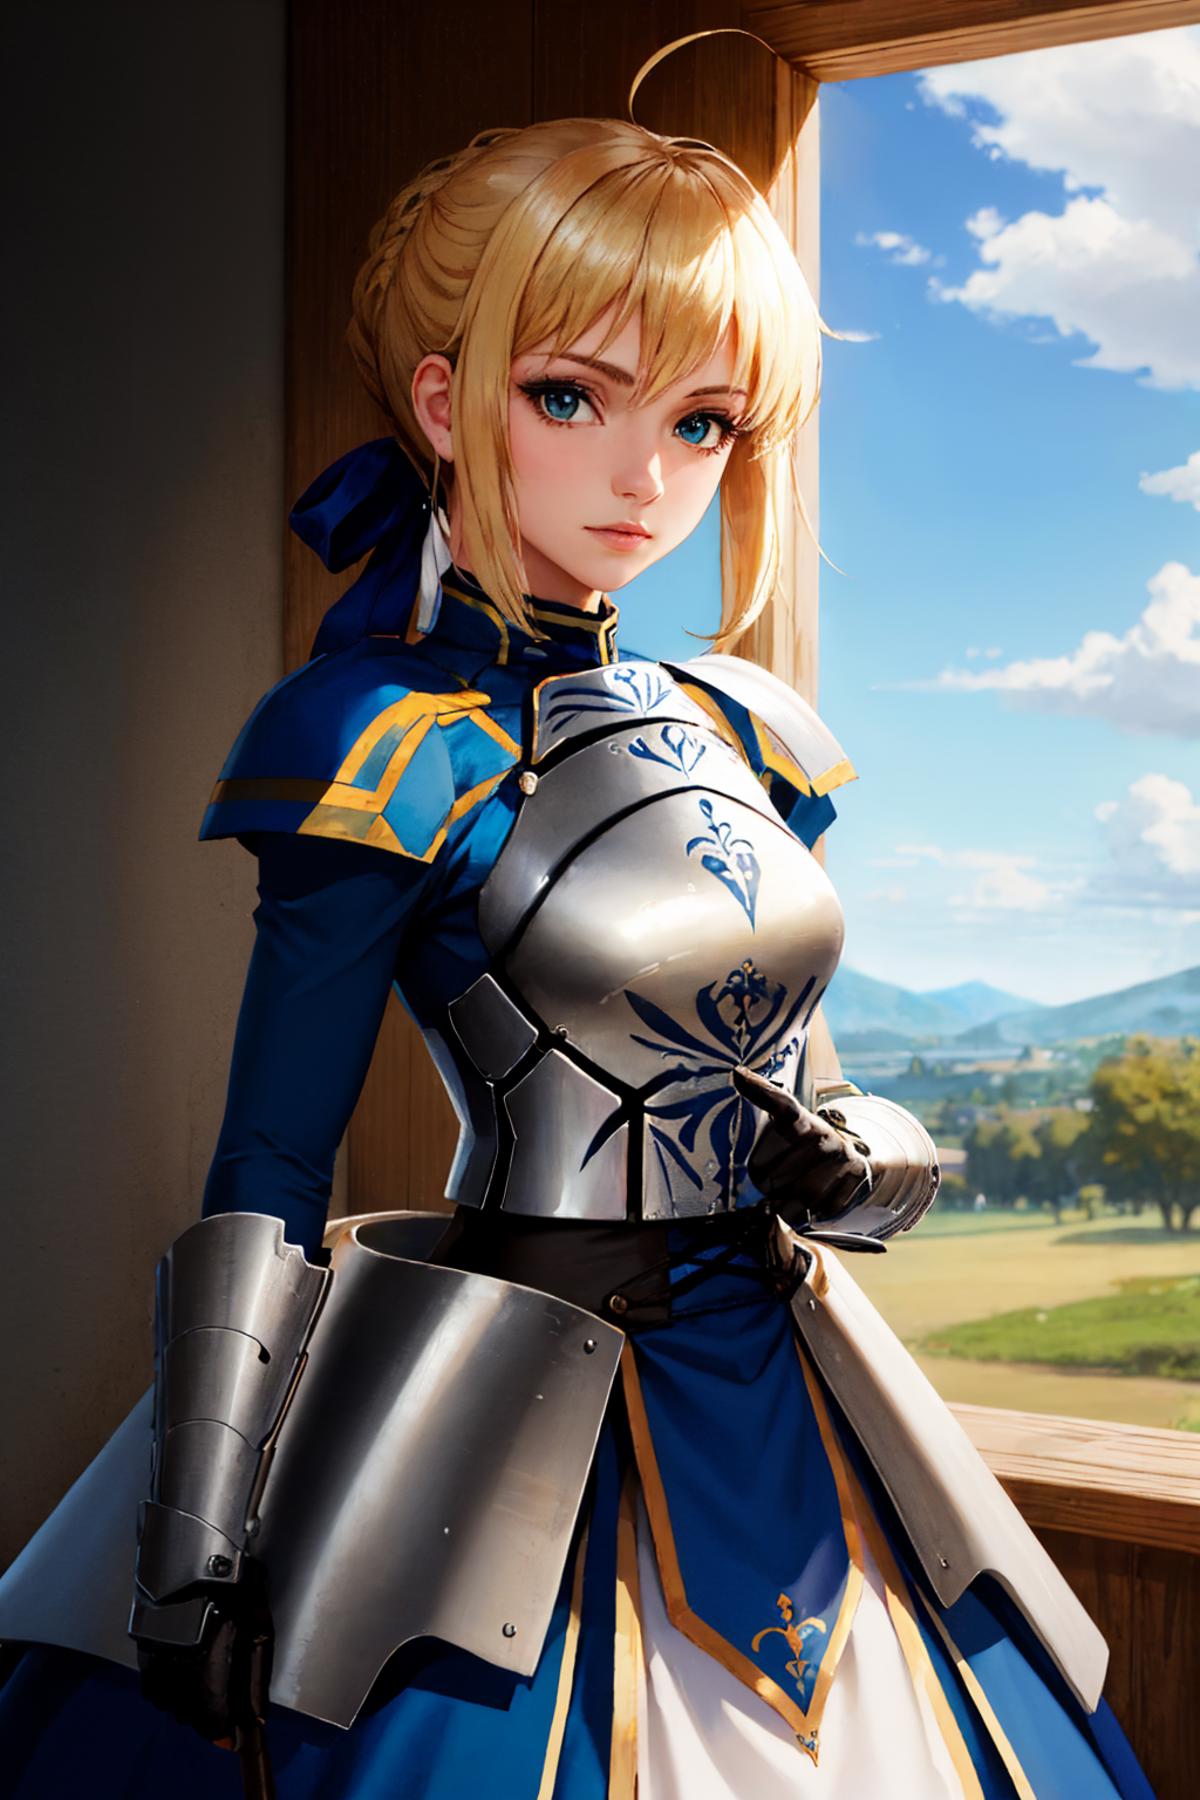 Artoria Pendragon (Saber) | Fate/stay night image by justTNP